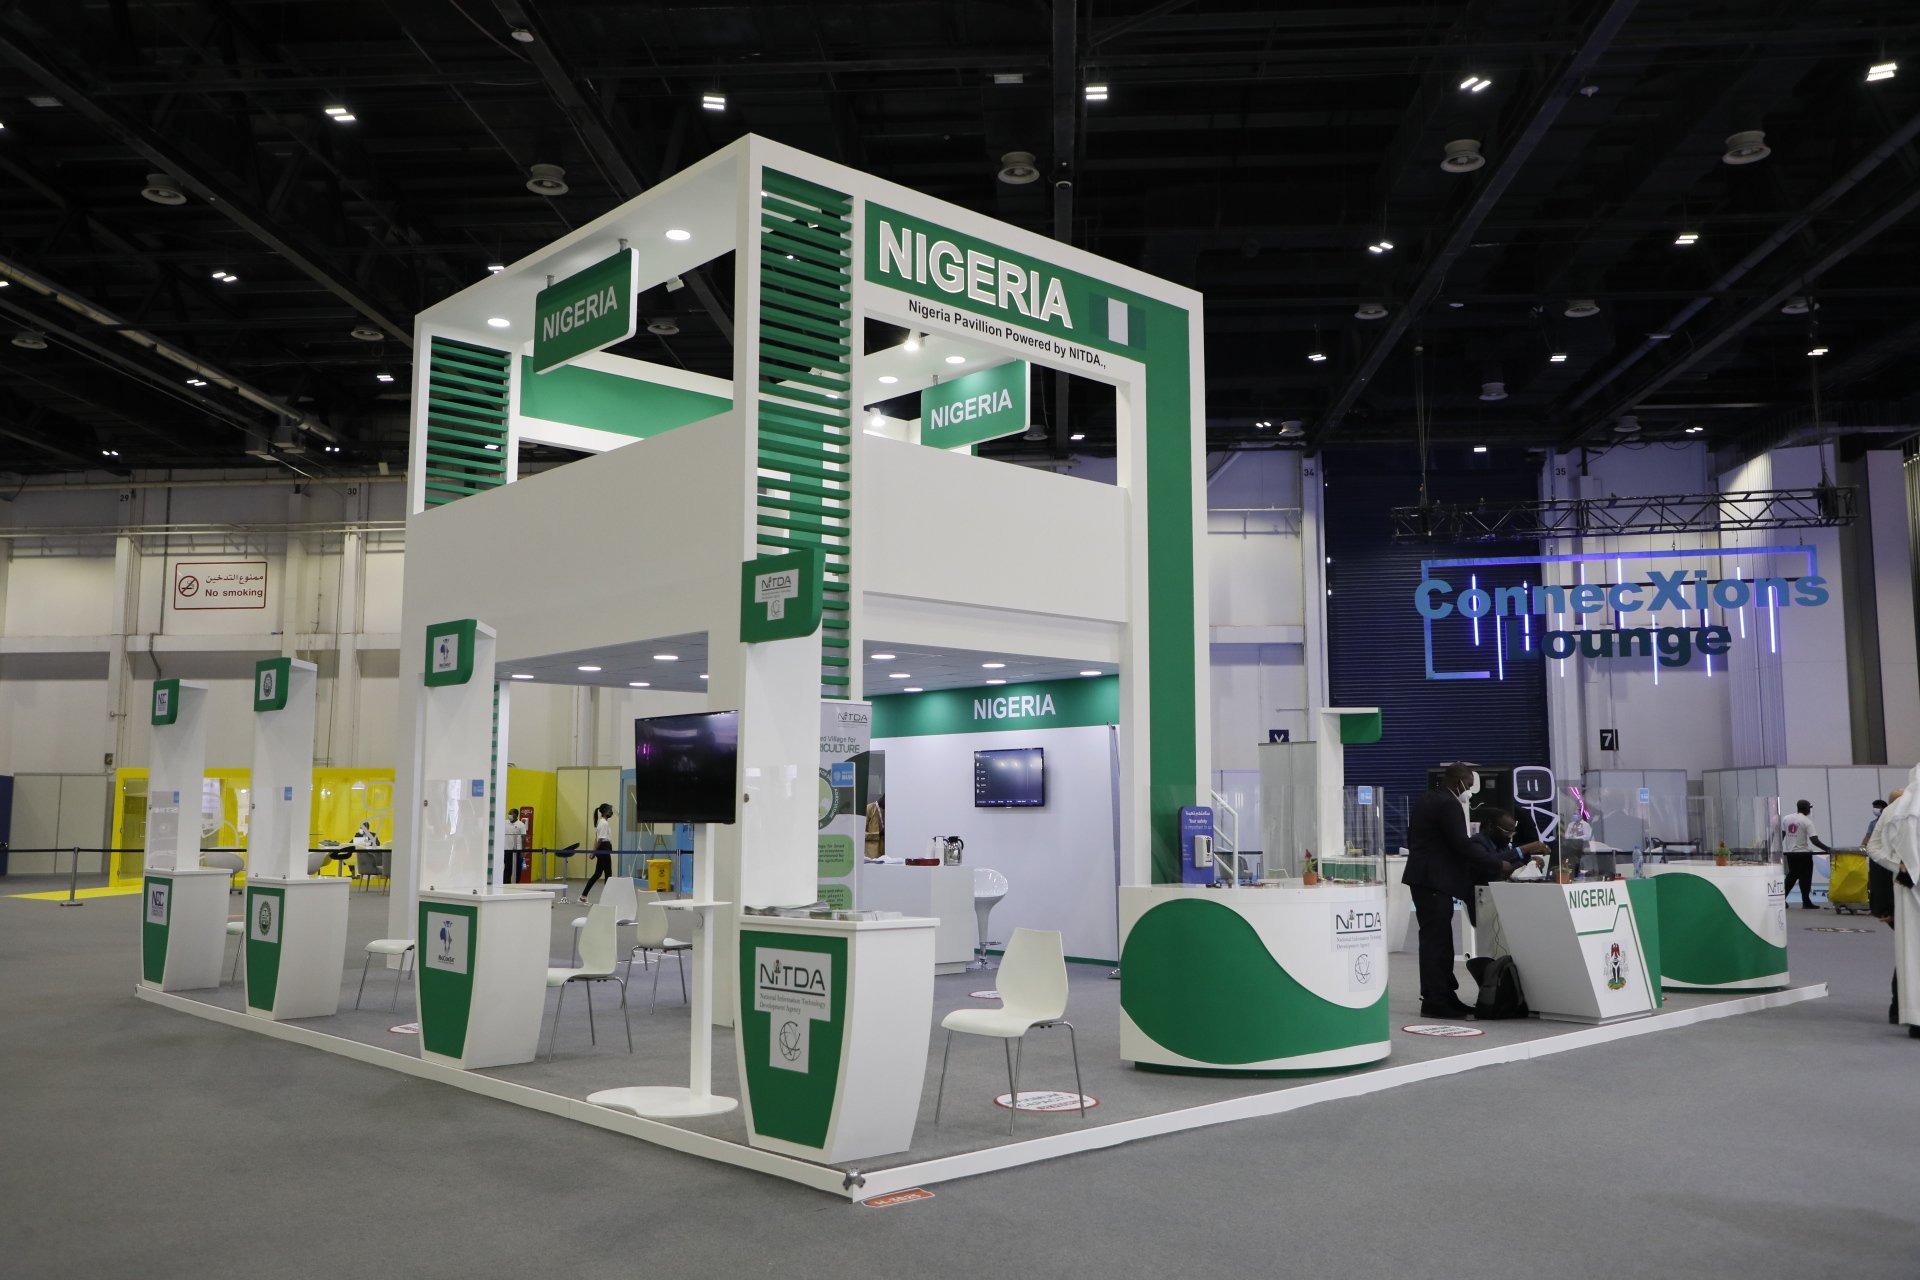 Tech is the major driver of Nigeria’s GDP, according to the country’s statistics bureau